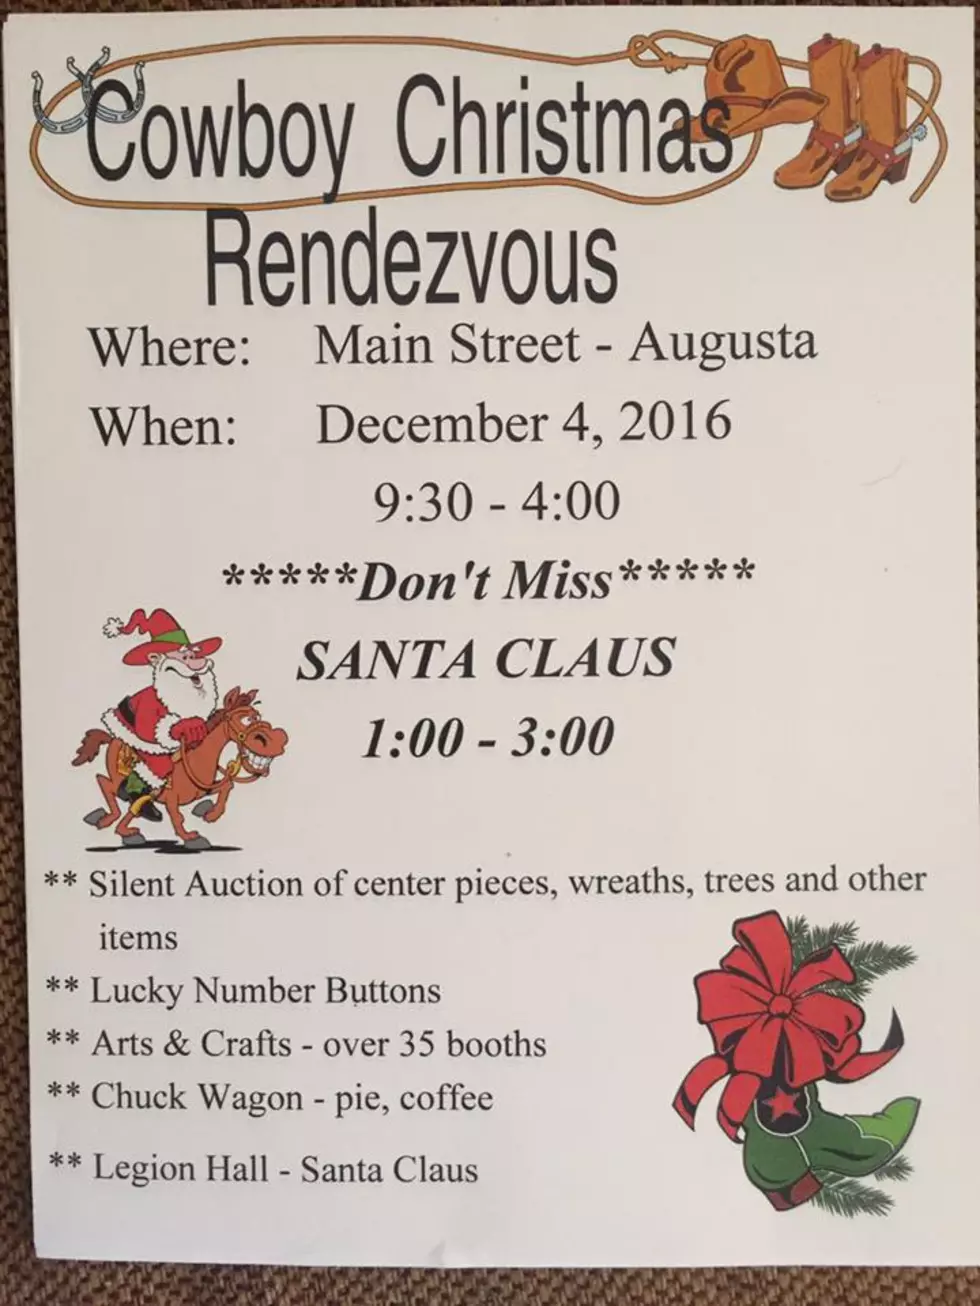 COWBOY CHRISTMAS RENDEZVOUS IN AUGUSTA